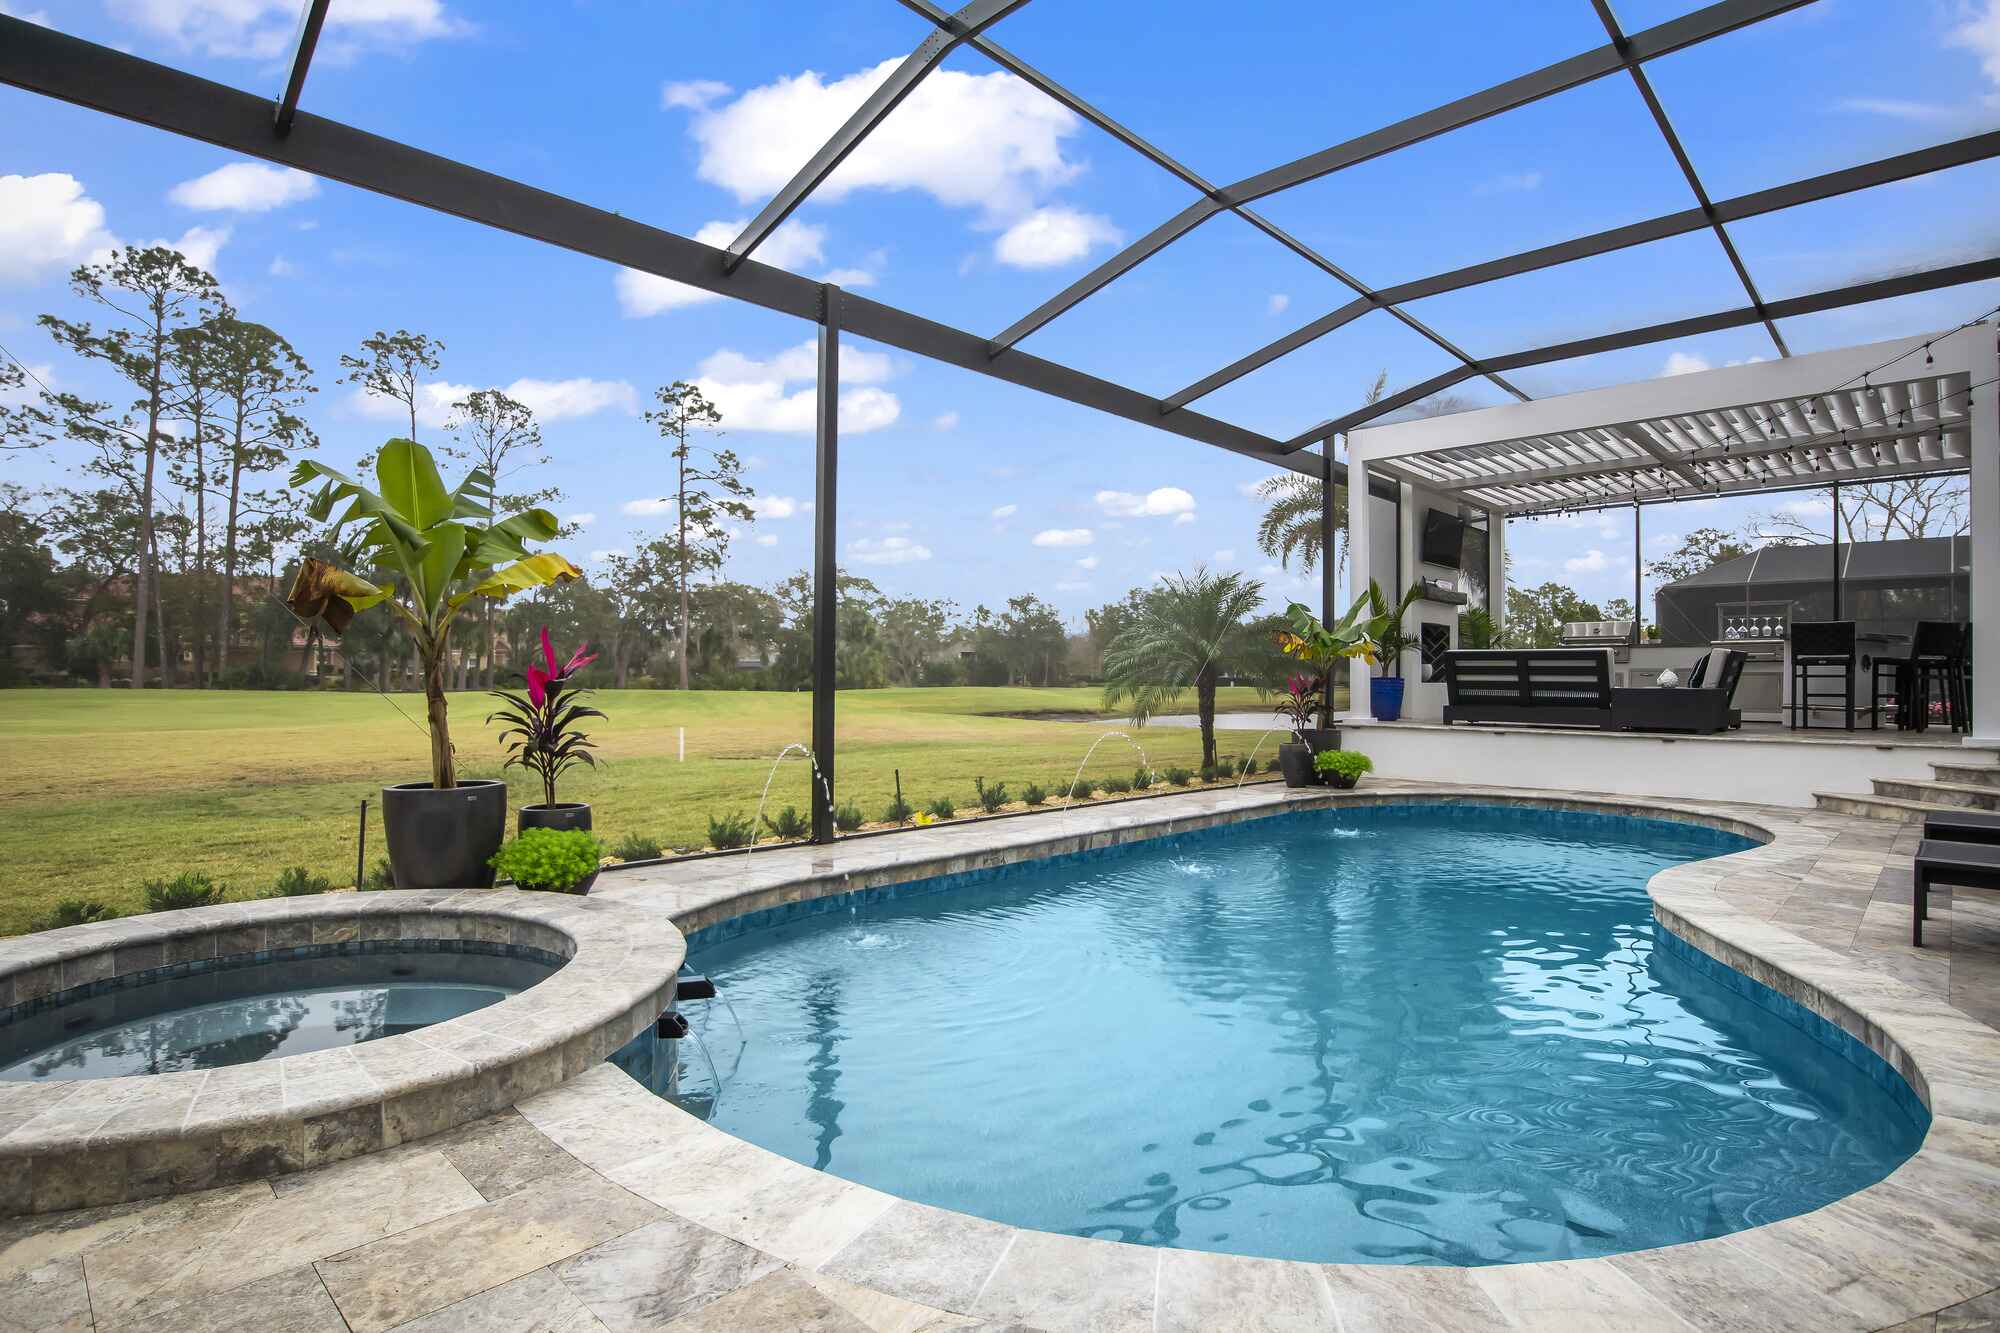 How Much Does a Pergola Cost in Jacksonville?